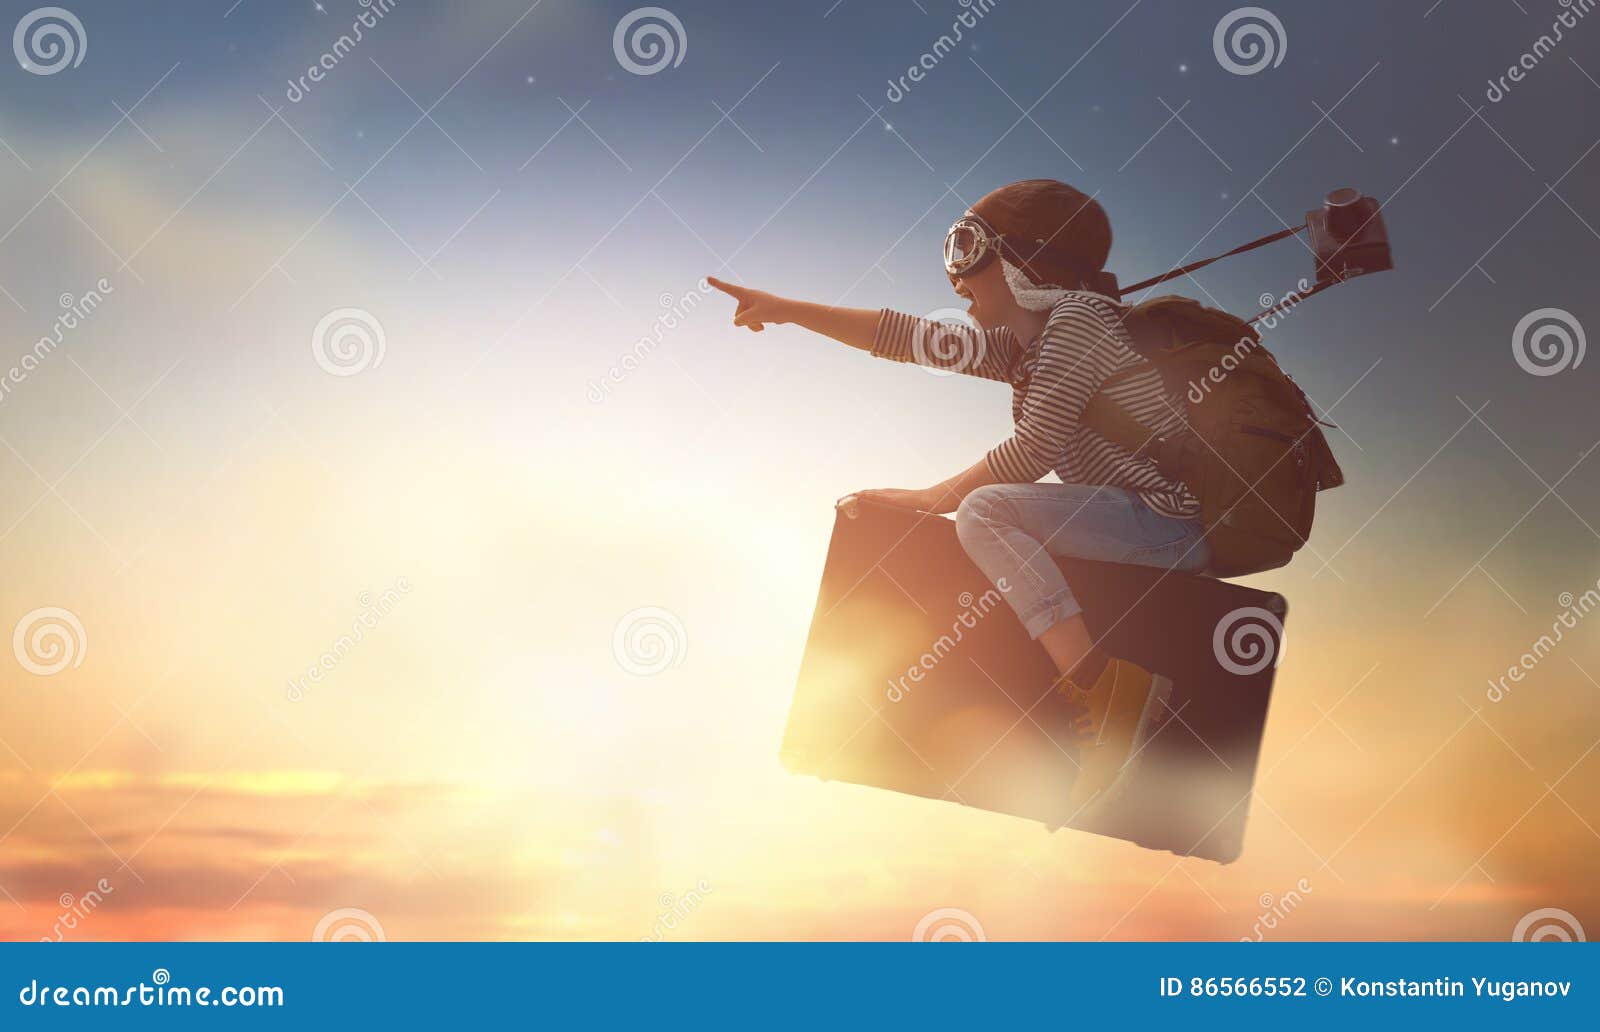 child flying on a suitcase